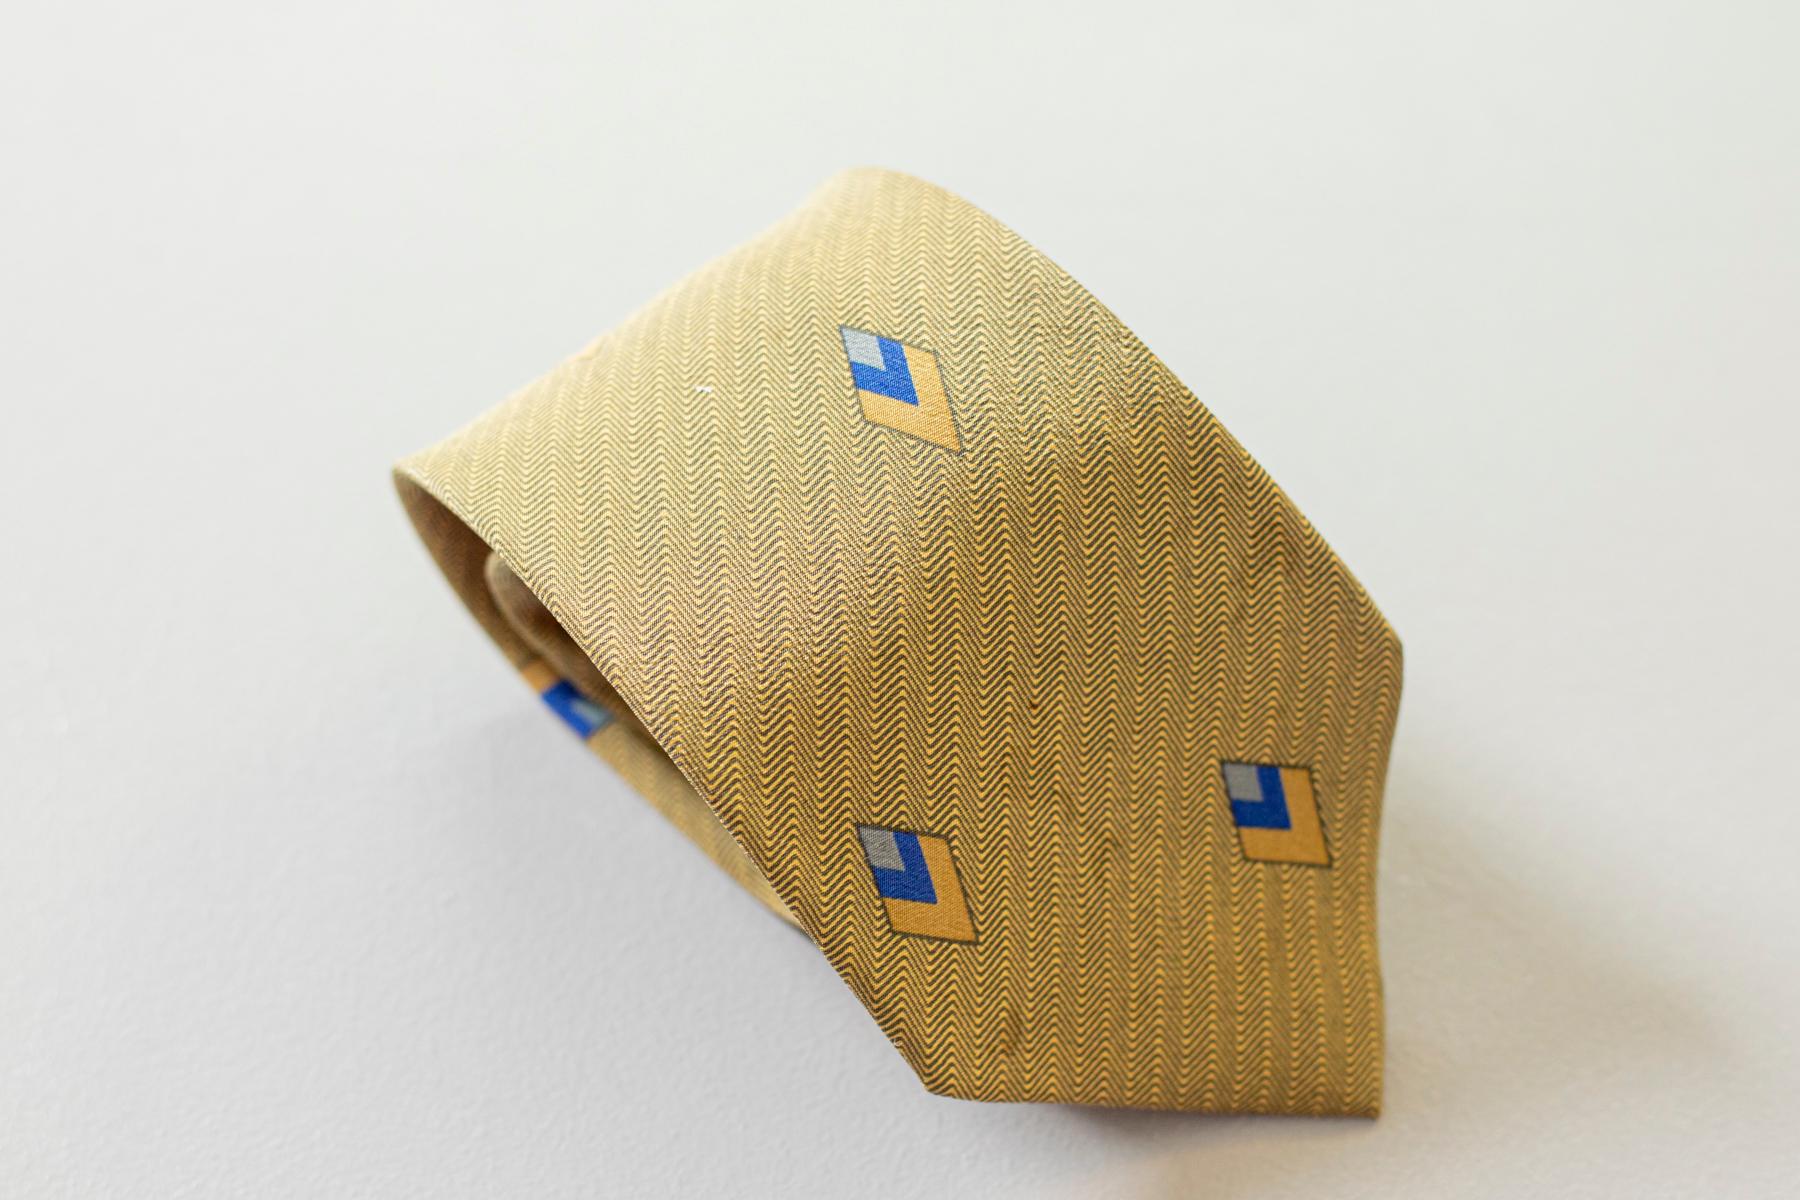 Refined vintage tie designed by Jacques Lavas, it is made of silk. Decorated with small rhombuses on a beige background, despite its simplicity it is an accessory that can make your look unique. Ideal for a job interview combining it with a formal